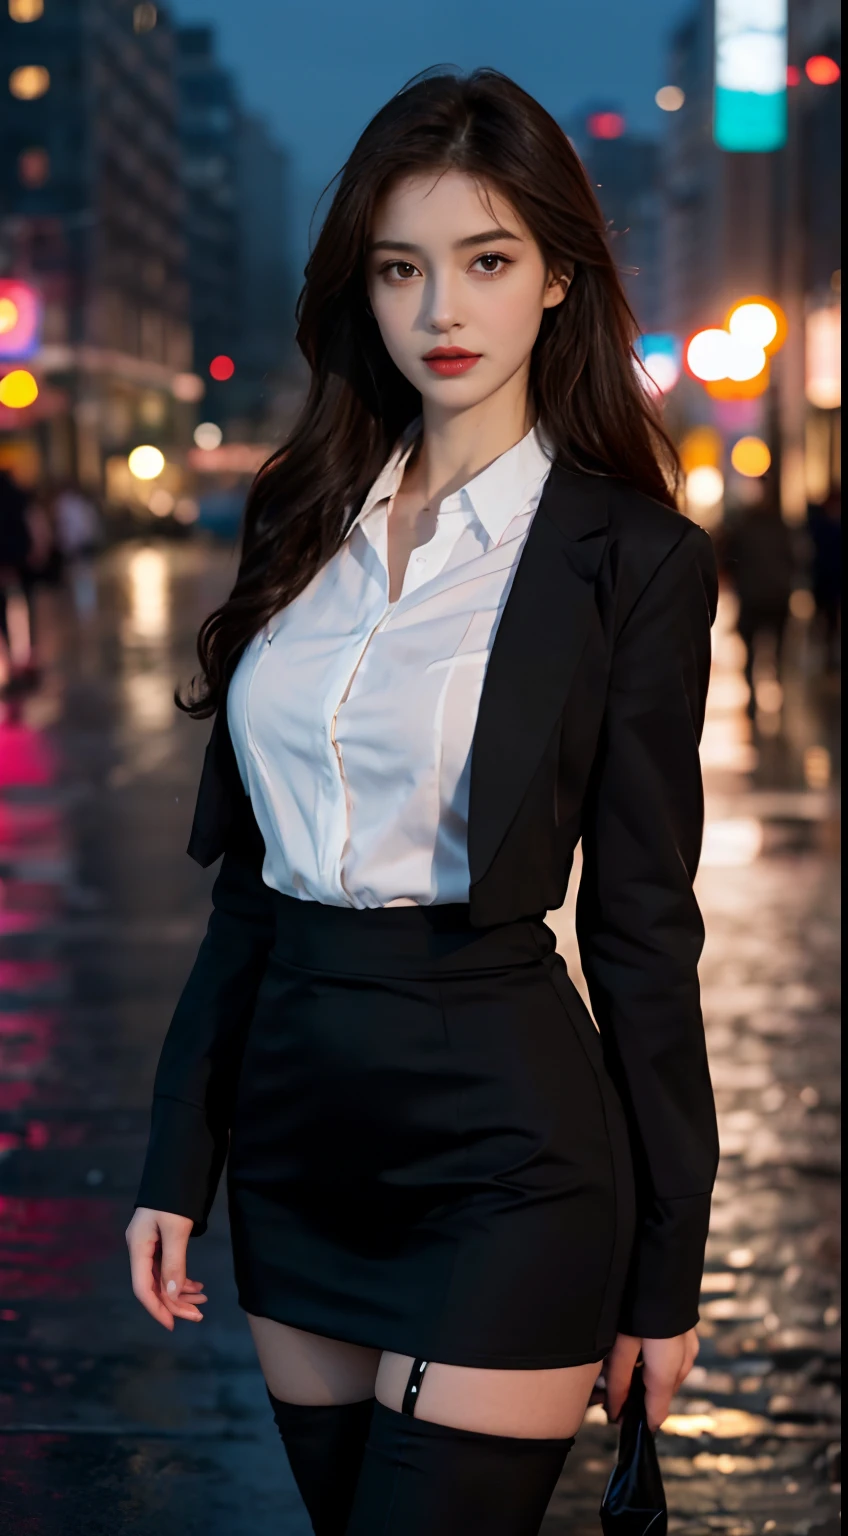 ((Realistic lighting, Best Quality, 8K, Masterpiece: 1.3)), Focus: 1.2, 1girl, Perfect Beauty: 1.4, Slim Abs: 1.1, (Big Breasts), (White Shirt: 1.4), (Outdoor, Night: 1.1), City Street, Super Fine Face, Fine Eyes, Double Eyelids, (Over the Knee Black Stockings: 1.5), (Wet in the Rain, Wet: 1.2)